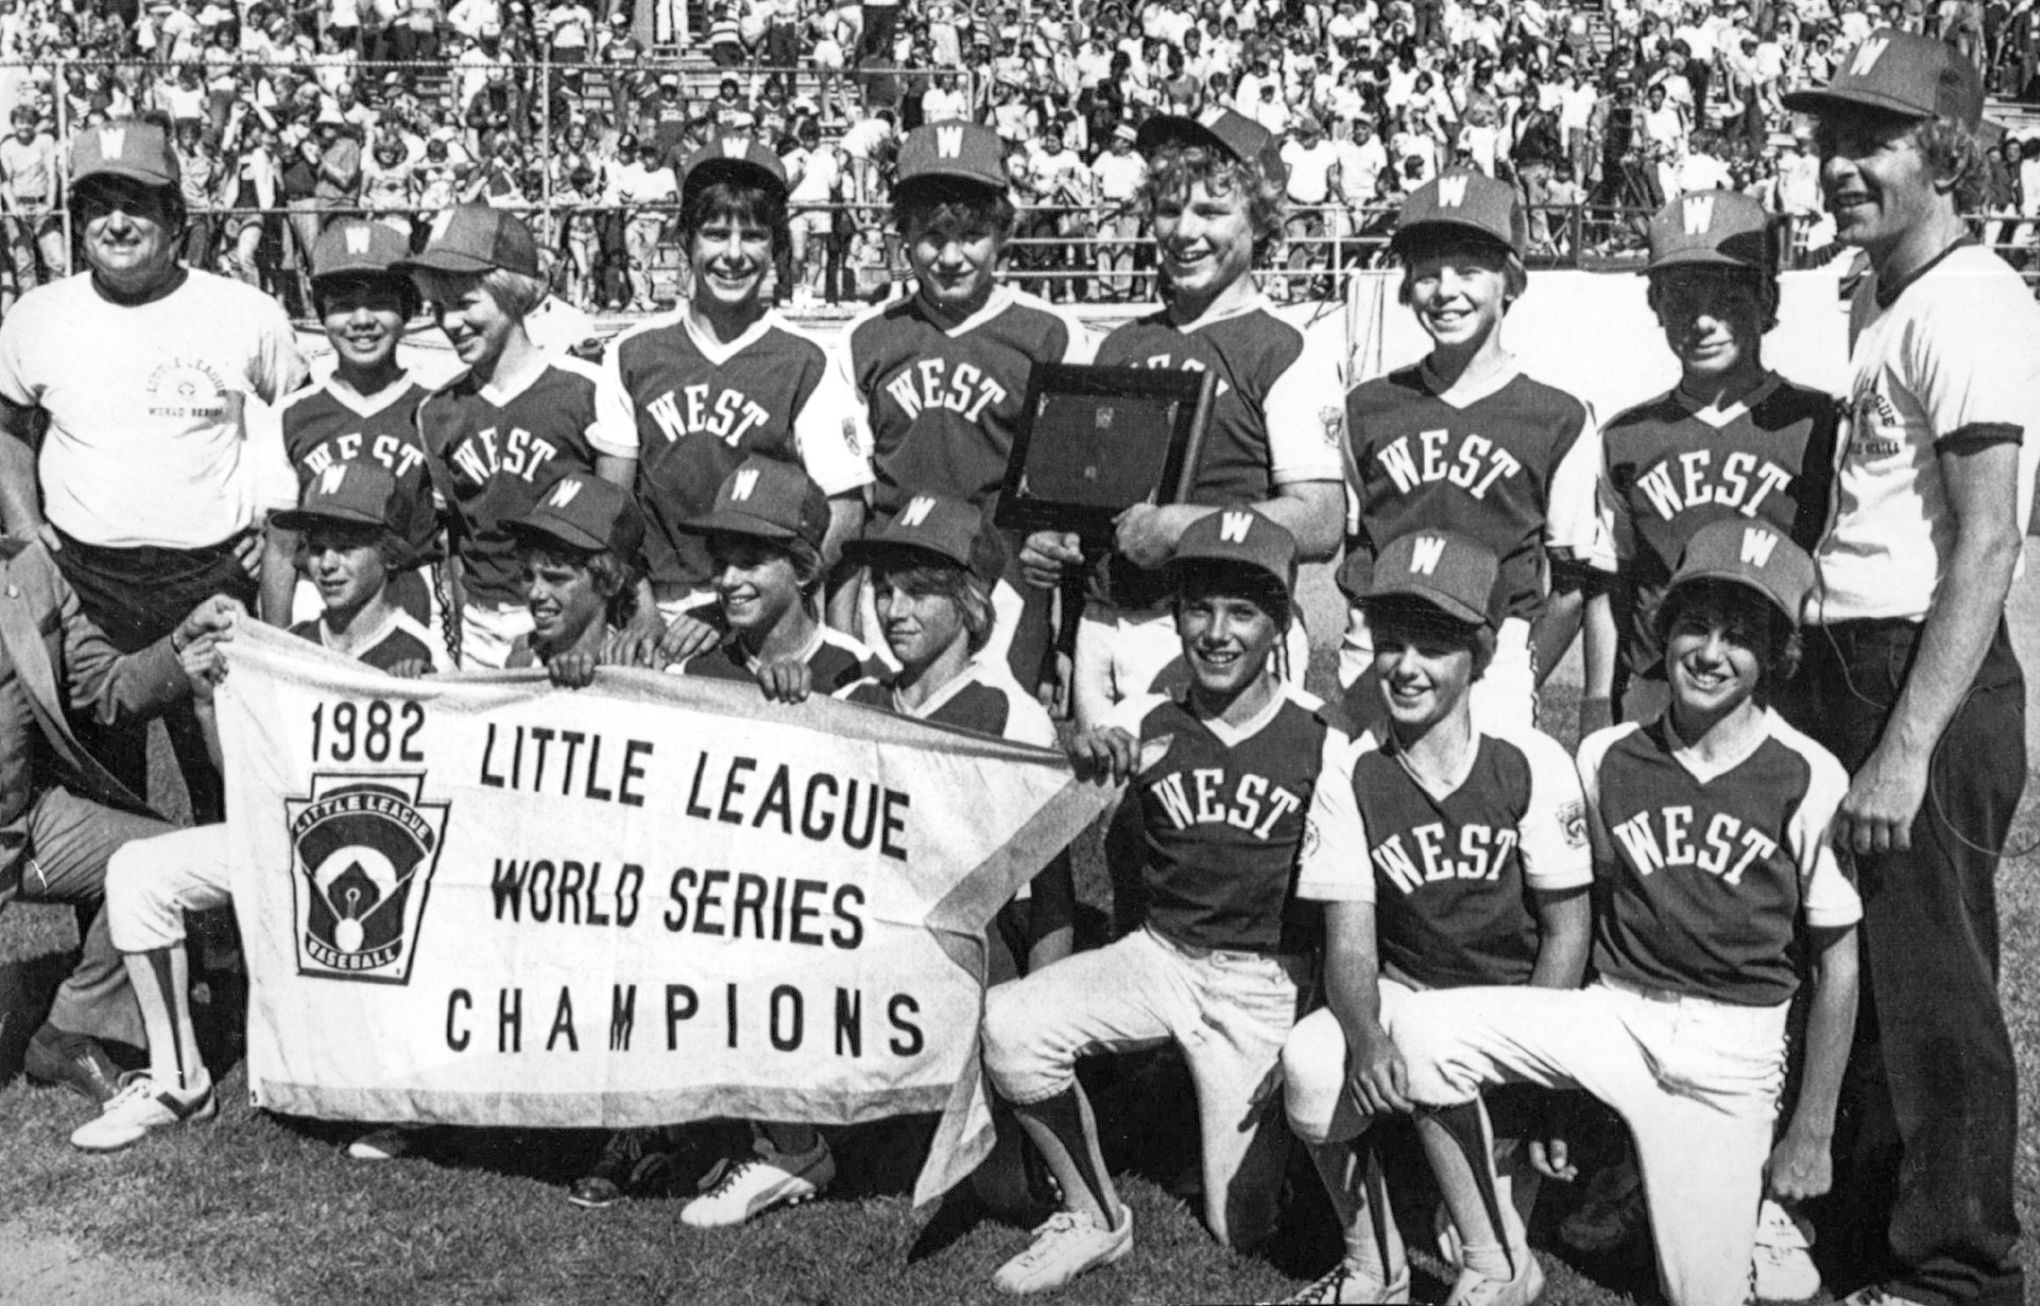 Notable college baseball players who starred in the Little League